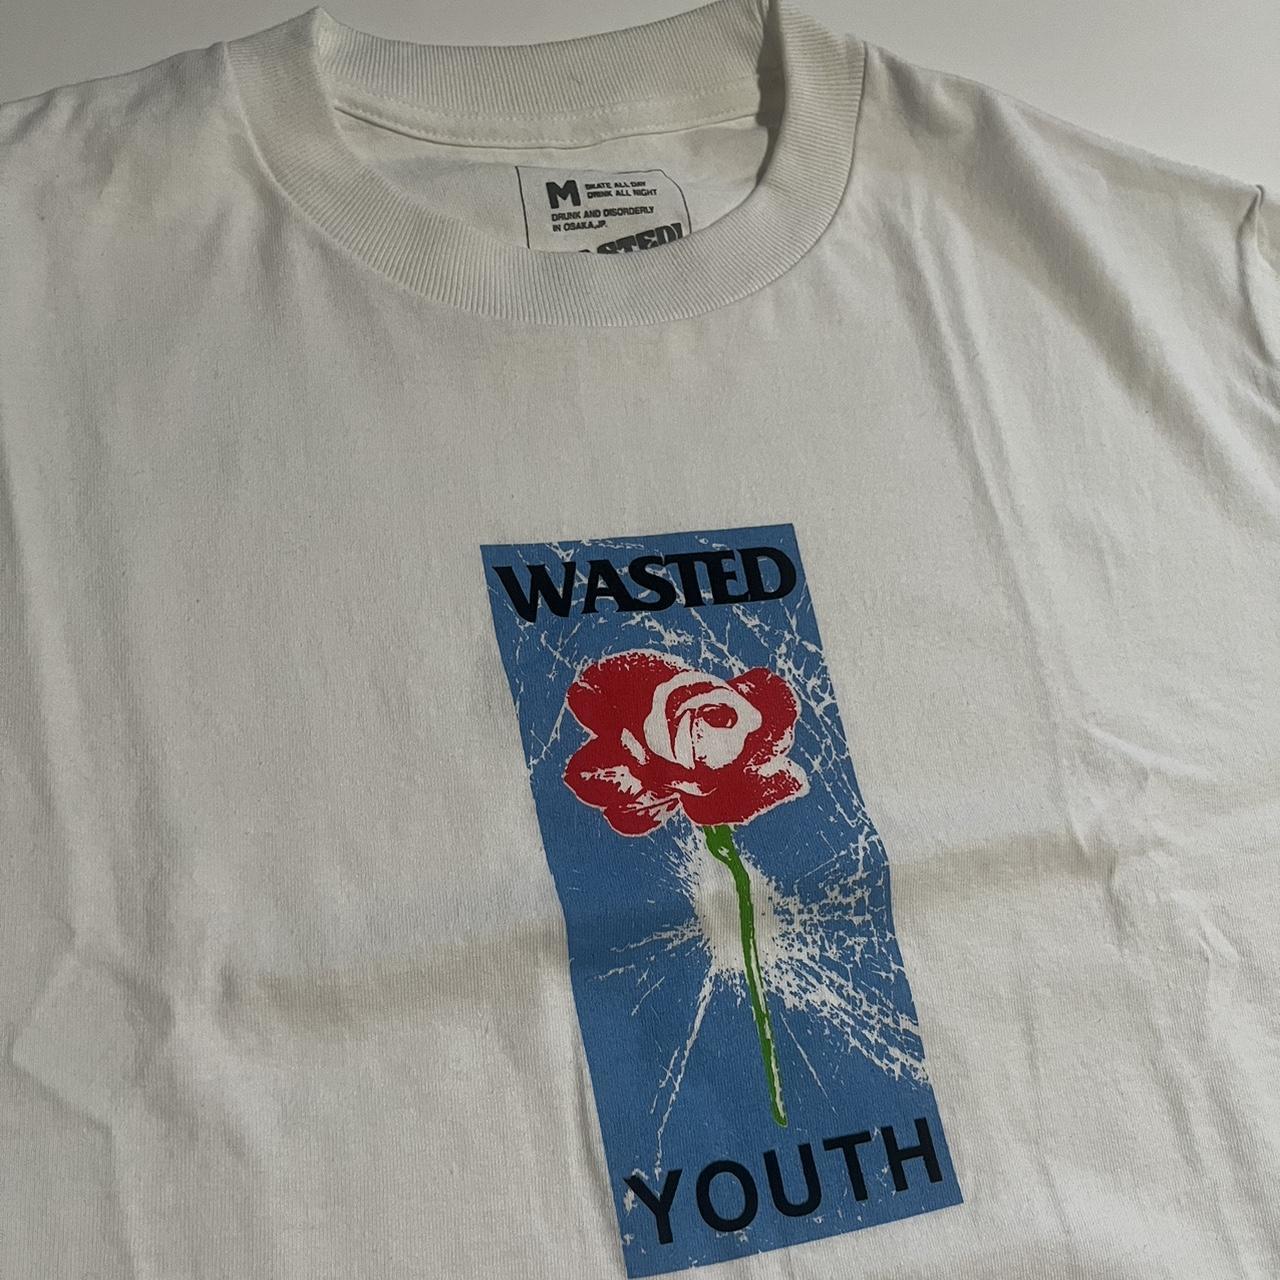 Wasted Youth shirt No stains, great... - Depop